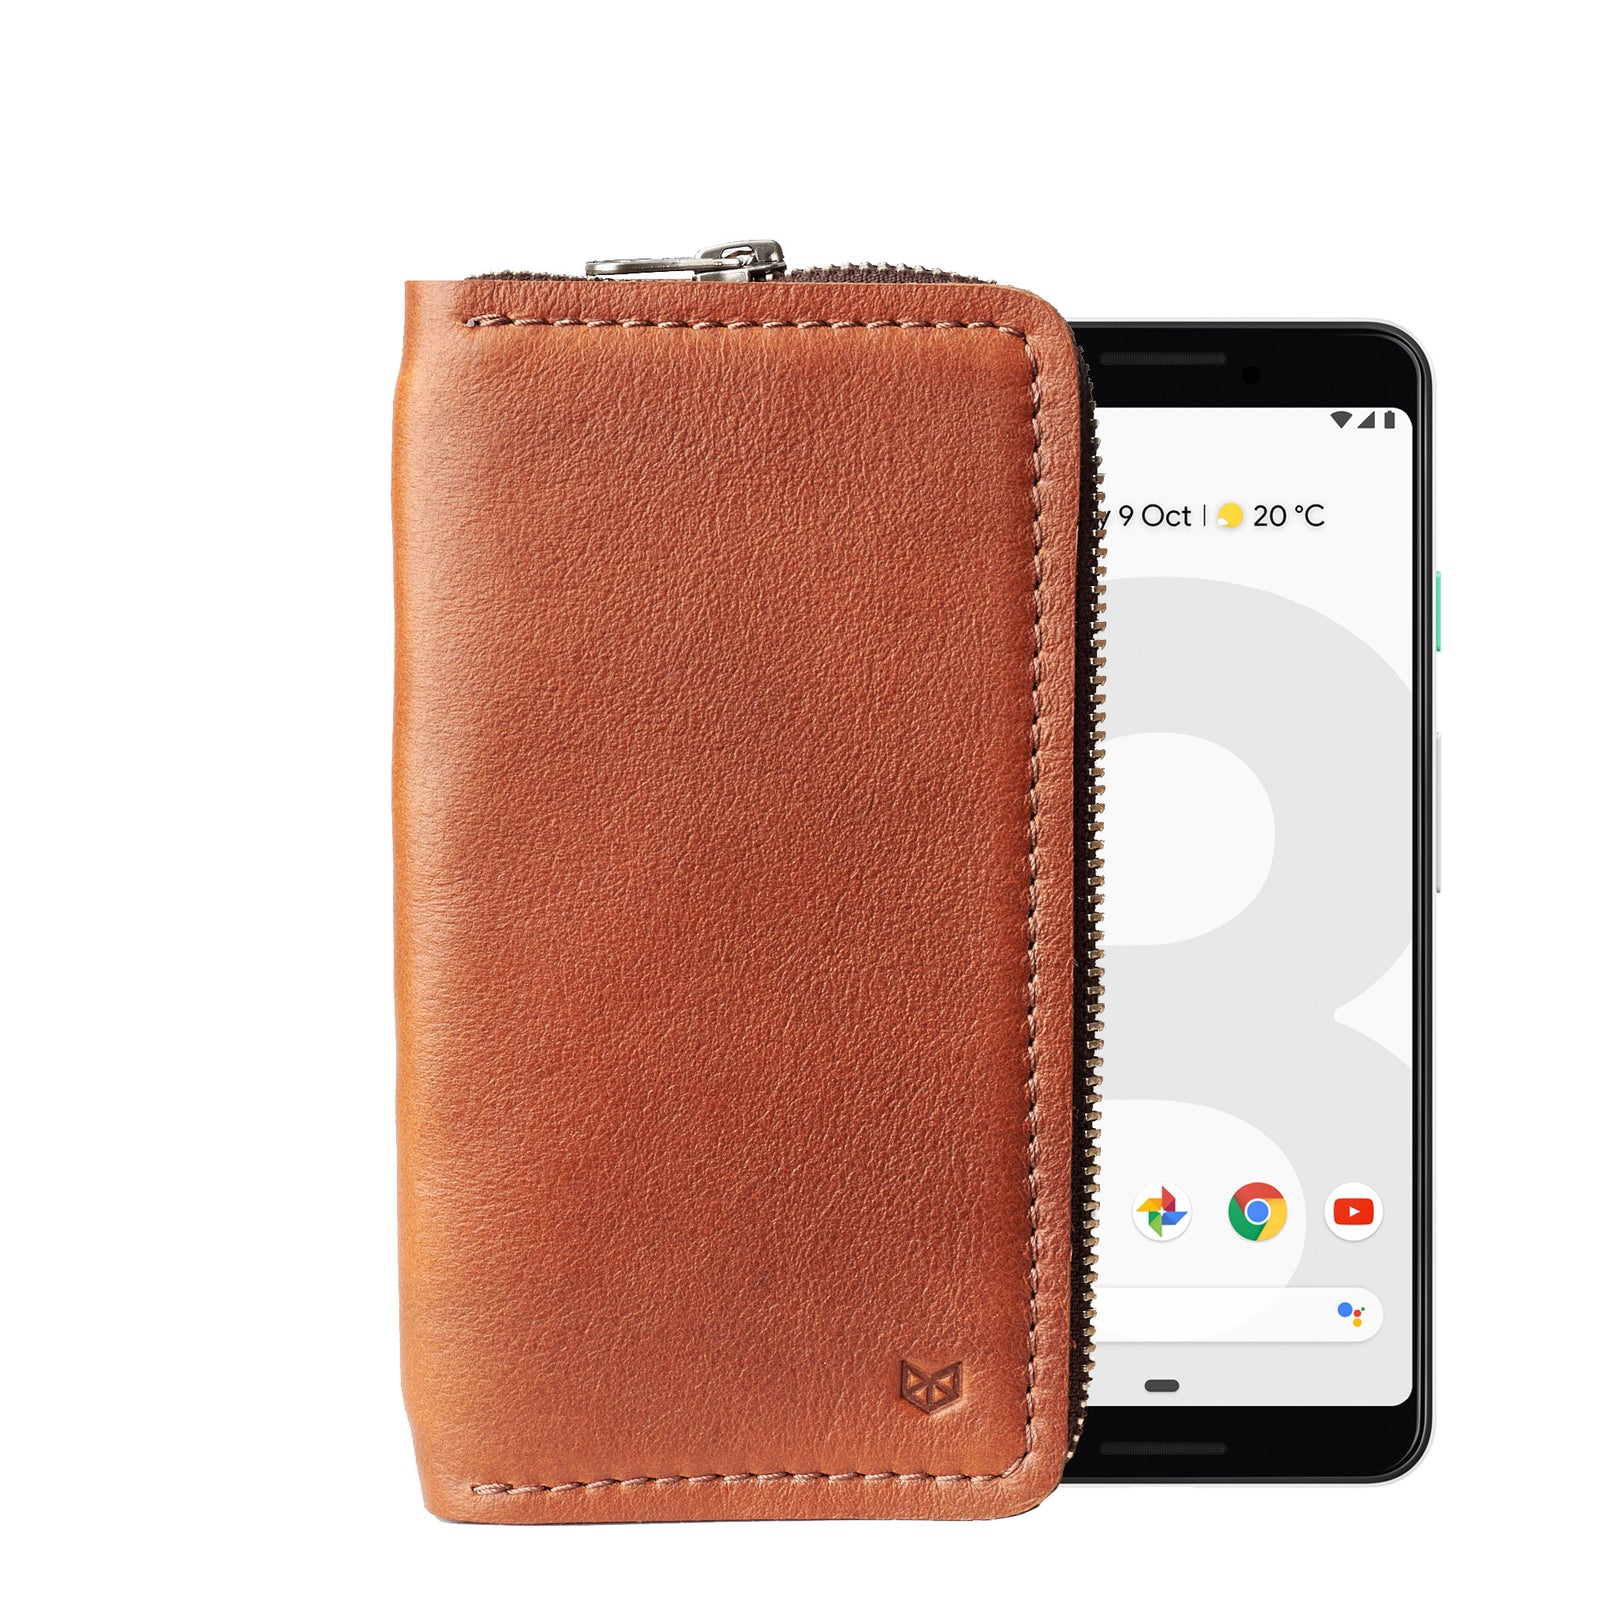 Pixel case, Carefully handcrafted brown leather case stand wallet for new Google Pixel 2 and 2 XL. Men's Pixel sleeve with card holder. Crafted by Capra Leather.